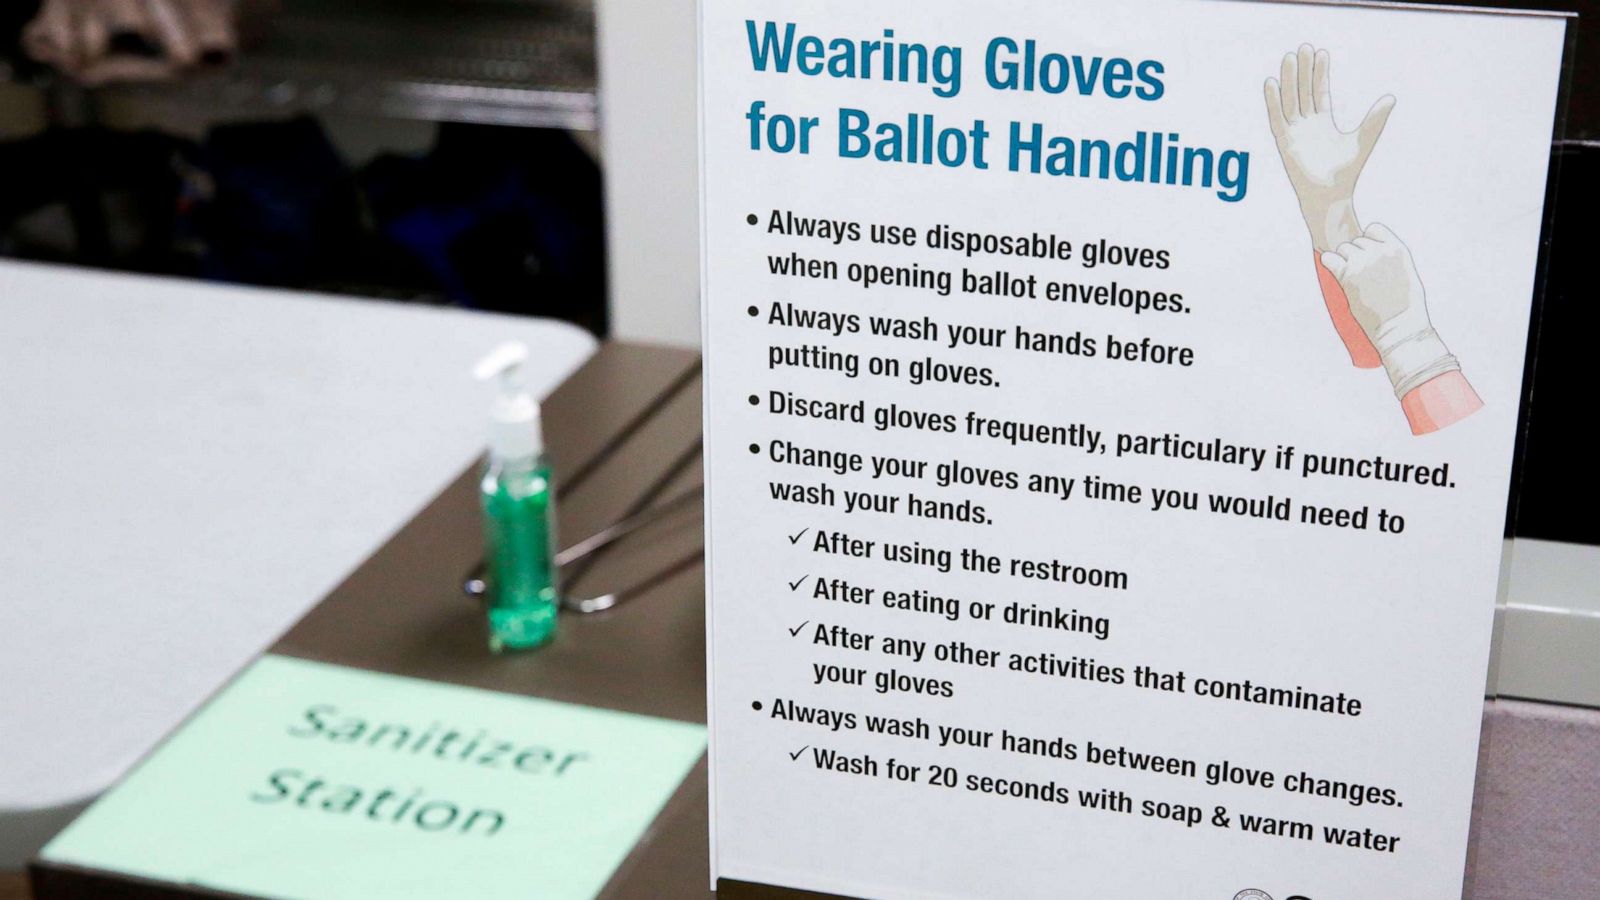 Primaries show high volume of absentee voting as states grapple with coronavirus photo